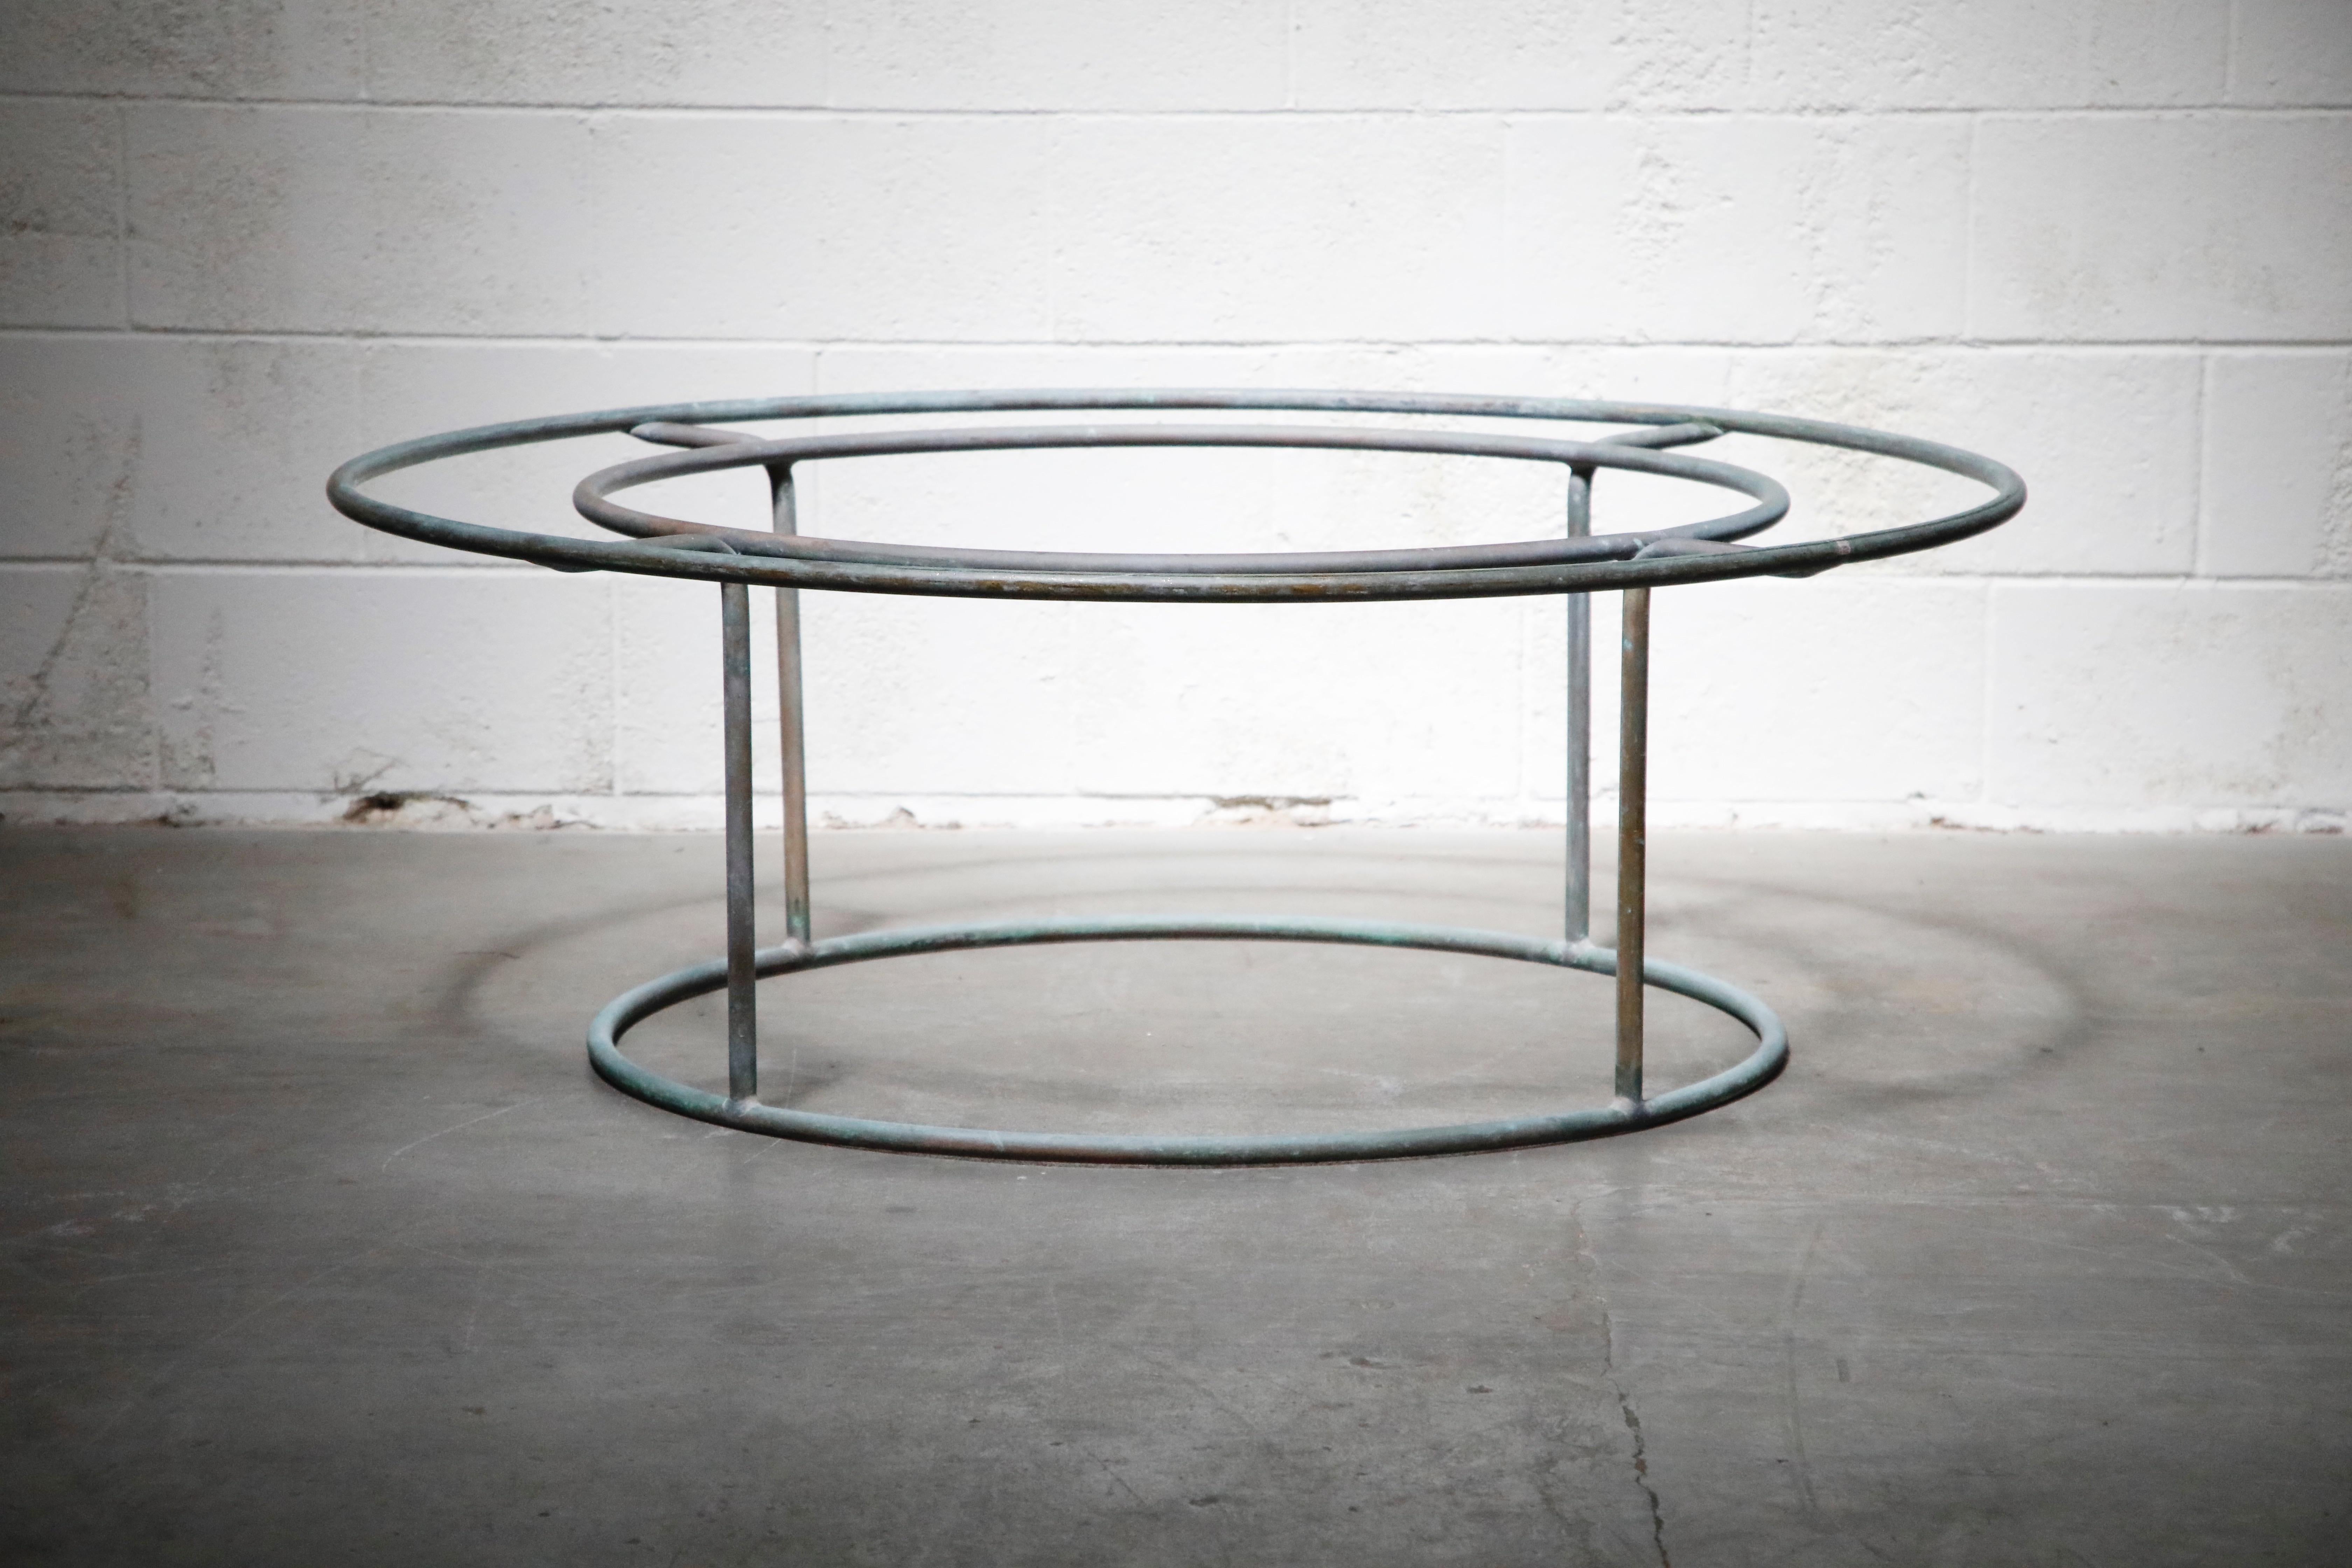 This highly-sought-after and collectible patinated copper patio coffee table was designed by Walter Lamb and produced by Brown Jordan. This rare original production example is from the earlier years of Lamb's work with Brown Jordan, dating to the